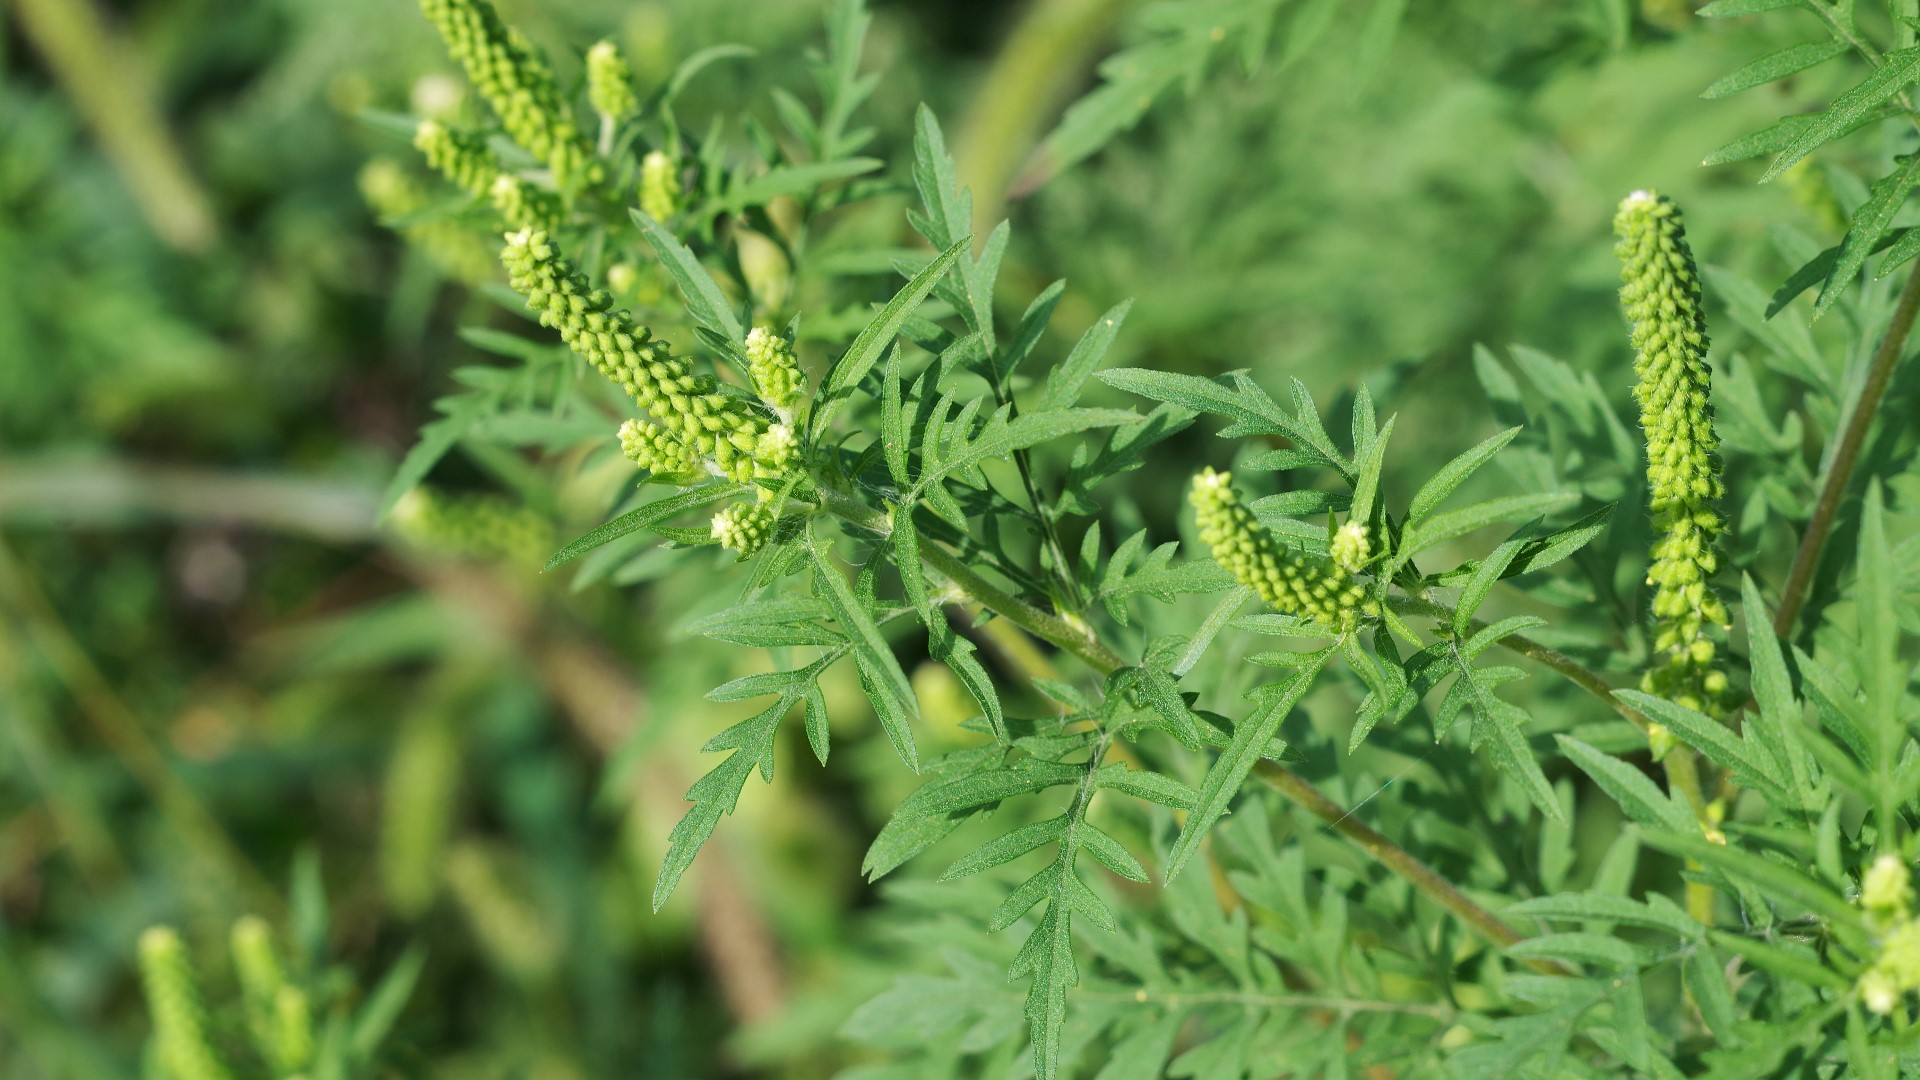 Ragweed is one of the more popular weeds and the leading cause of allergies during the months of August and September.